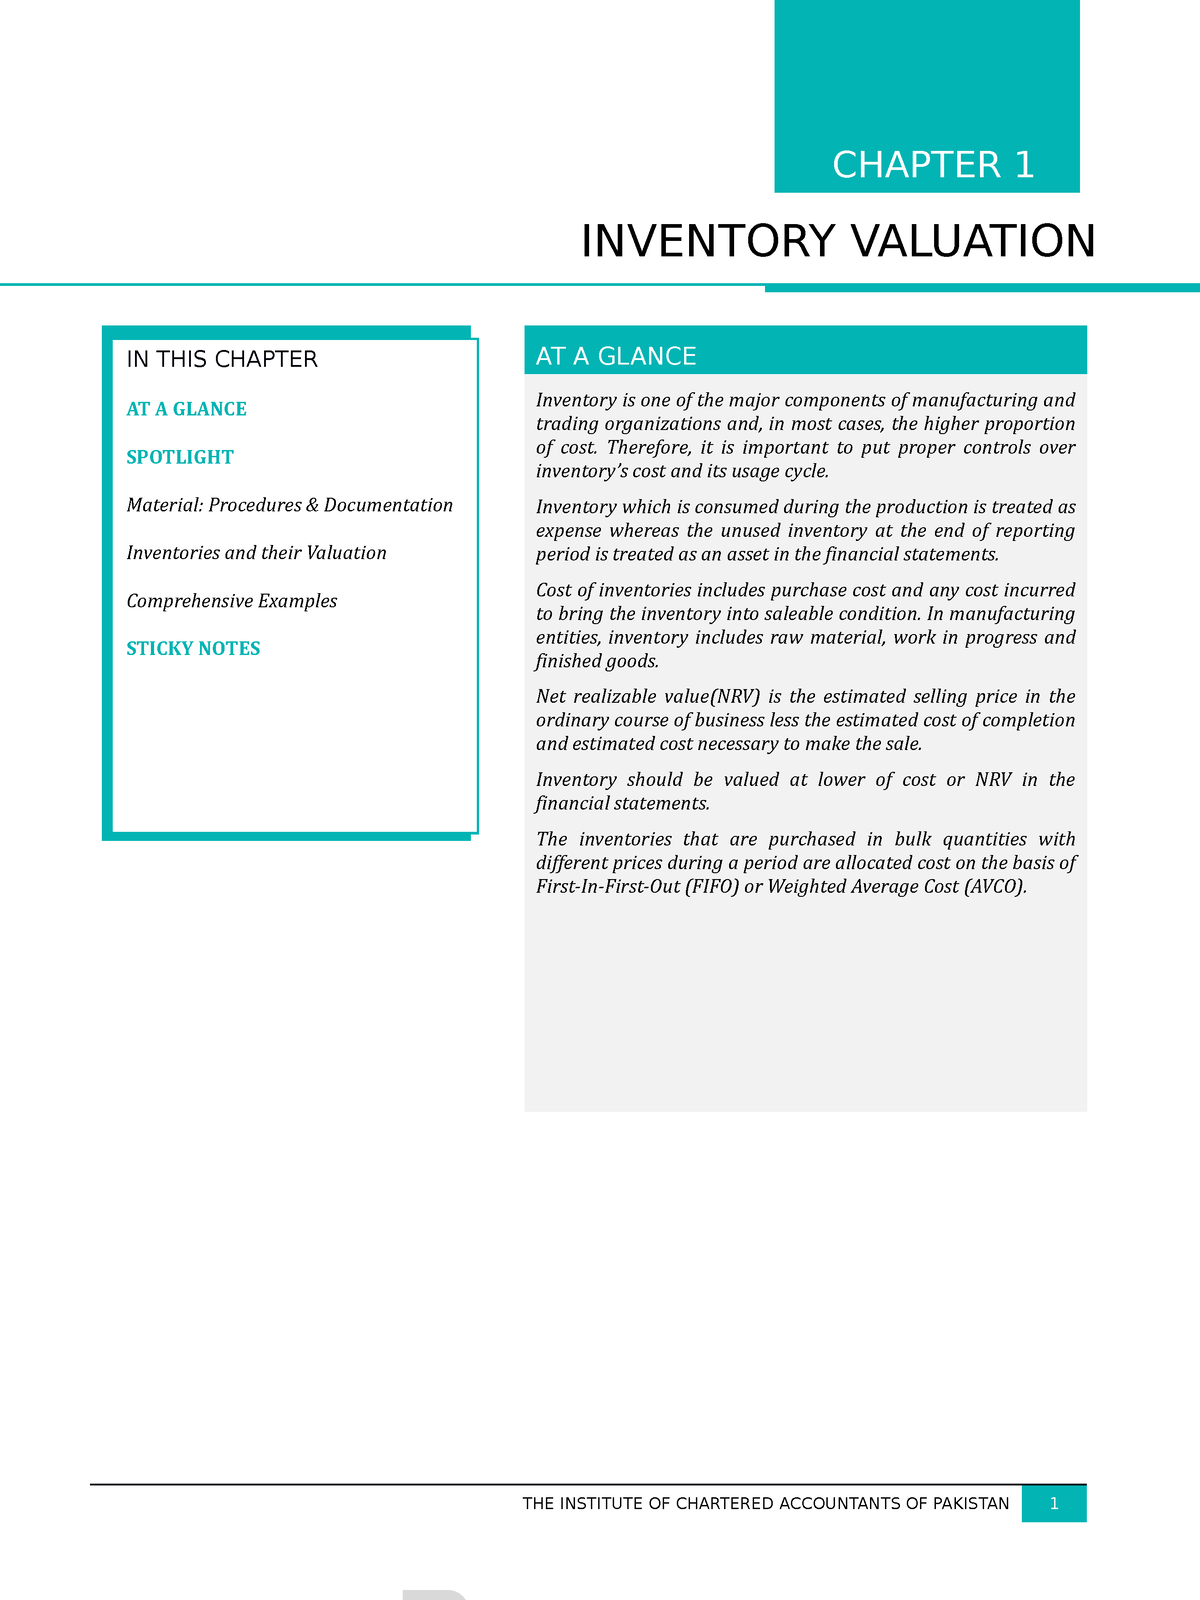 Average Cost Inventory Method, AVCO, Definition, Formula, Calculation  Example, Journal Entries